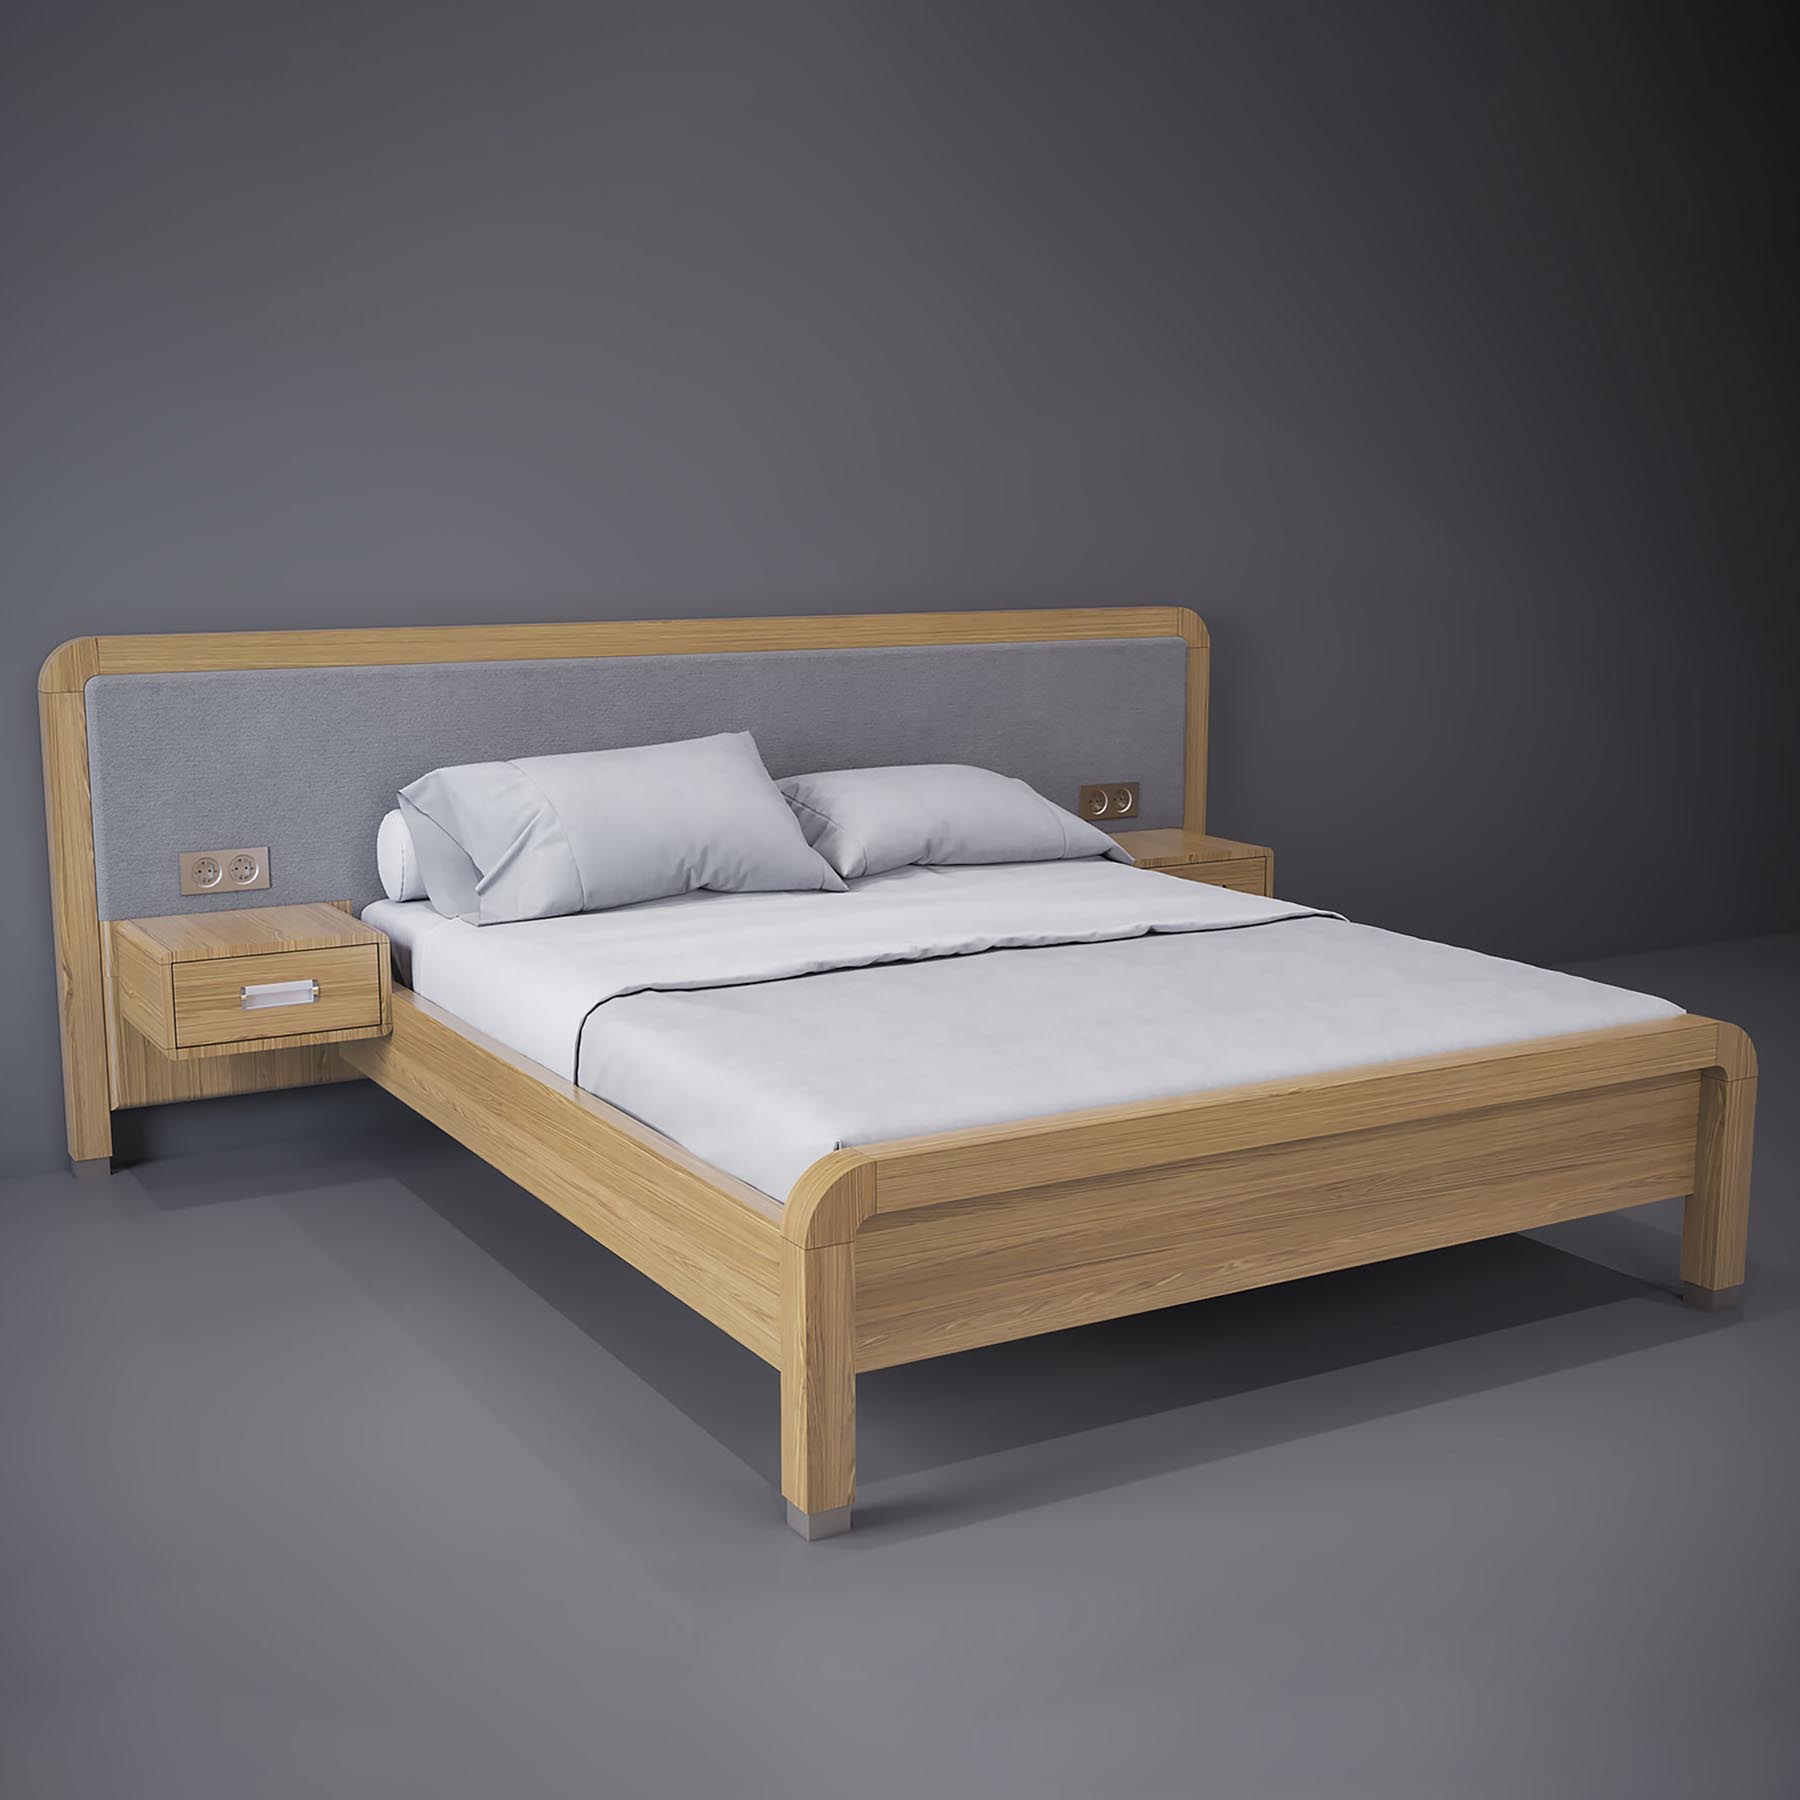 Double bed with hanging cabinets from the Warsaw collection